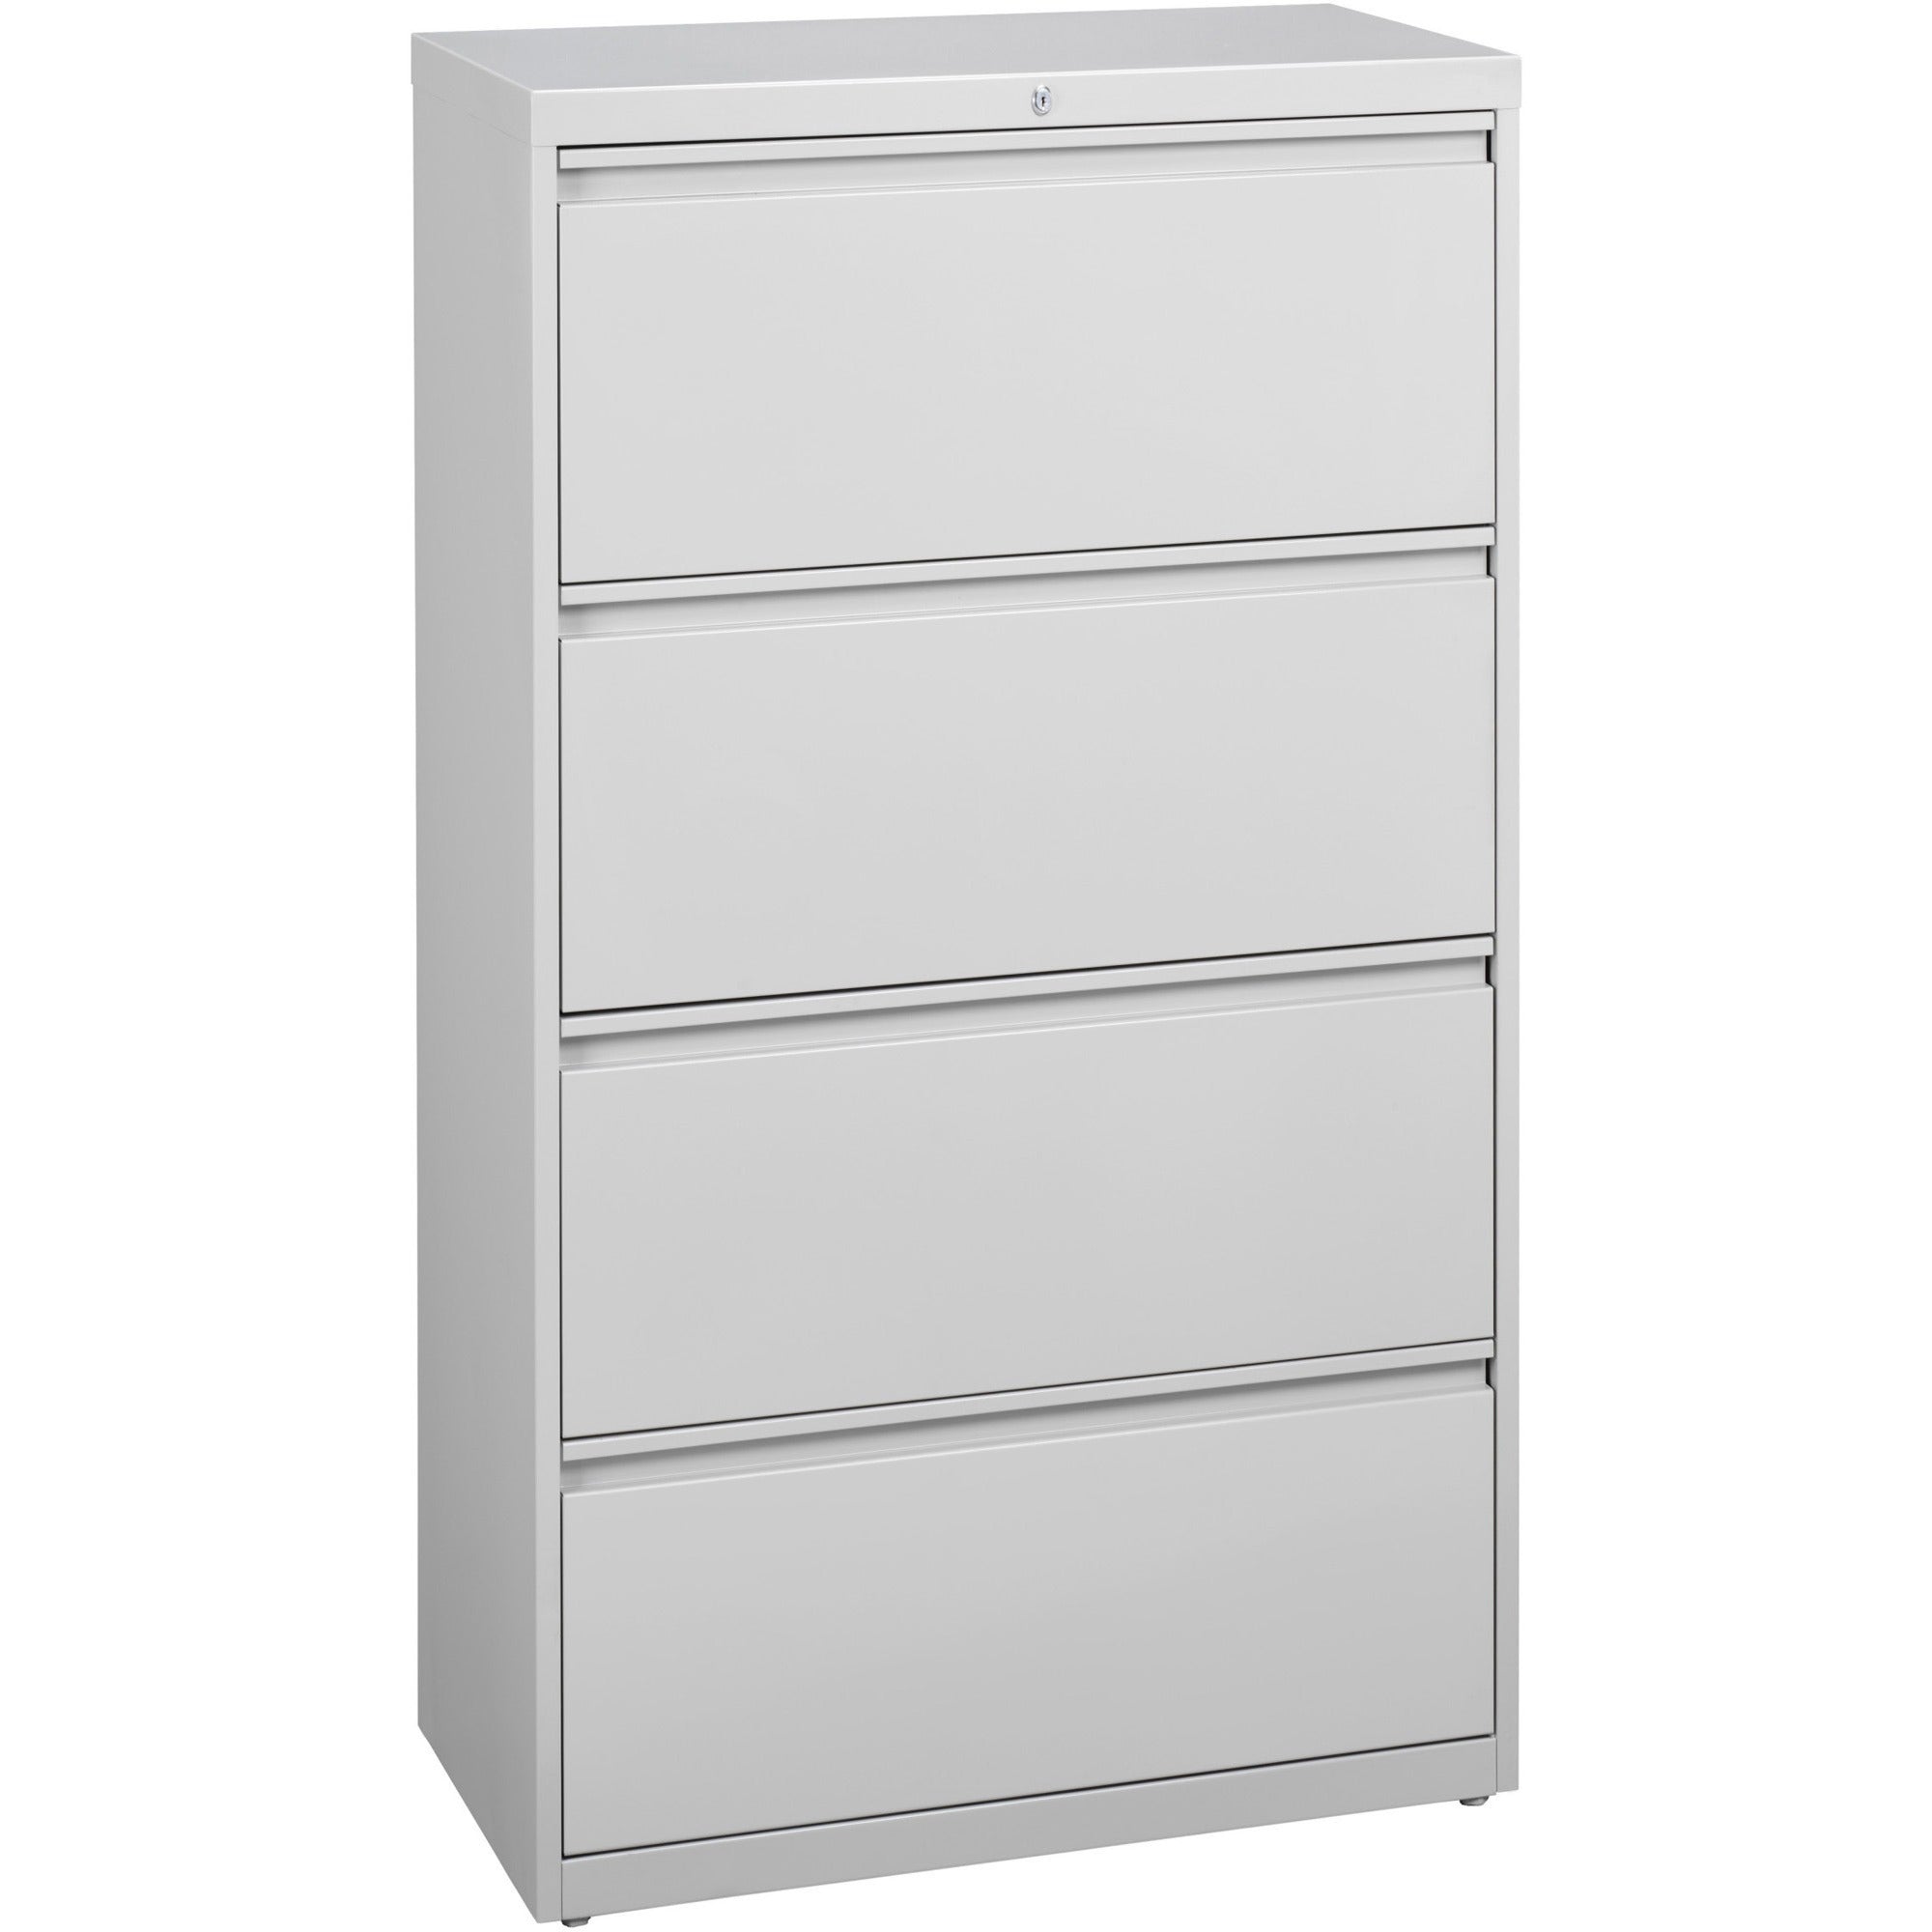 Lorell Fortress Series Lateral File - 36" x 18.6" x 52.5" - 4 x Drawer(s) for File - Legal, Letter, A4 - Lateral - Rust Proof, Leveling Glide, Interlocking, Ball-bearing Suspension, Label Holder - Light Gray - Baked Enamel - Steel - Recycled - 